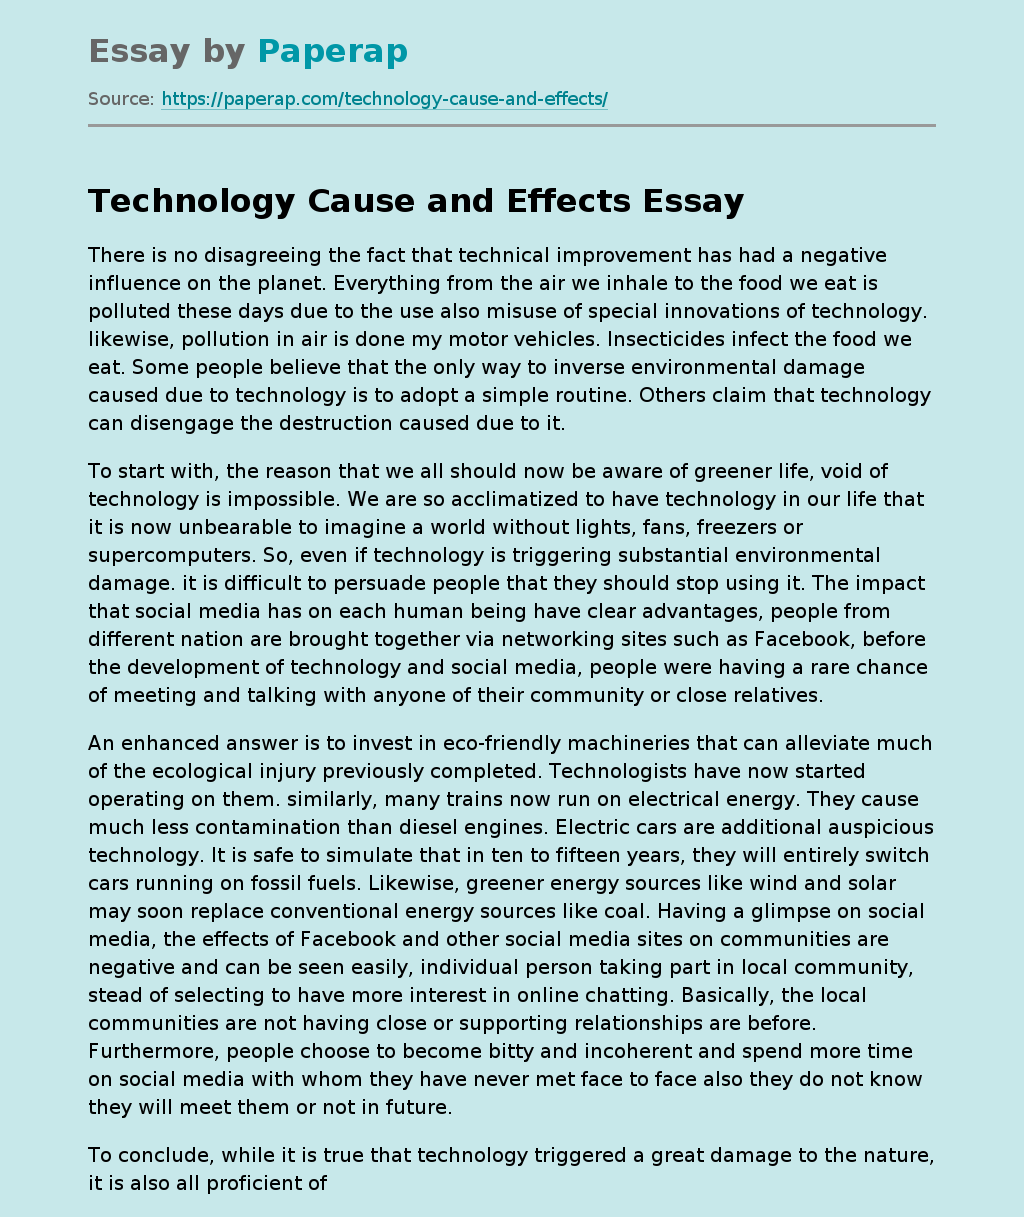 Technology Cause and Effects